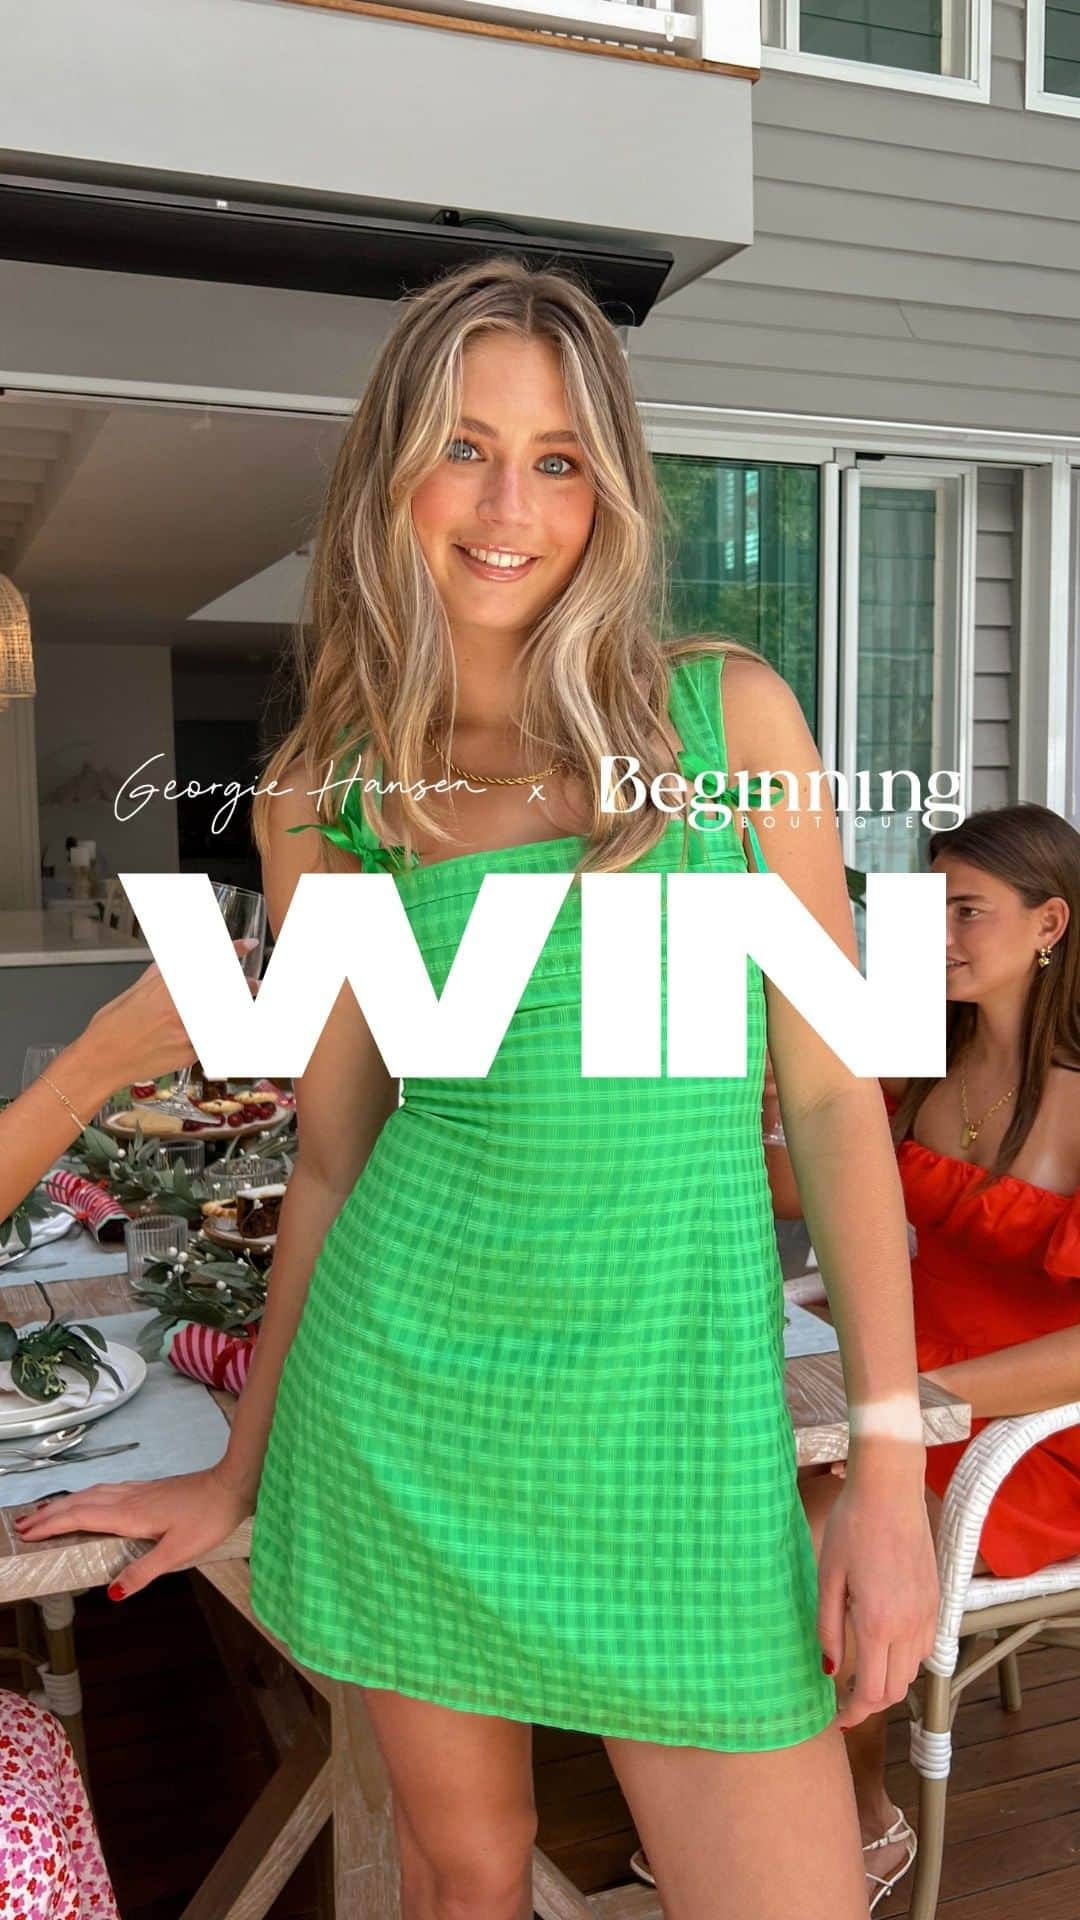 Beginning Boutiqueのインスタグラム：「WIN YOUR CHRISTMAS WARDROBE! 🎄✨⁠ ⁠ We are giving one lucky follower the chance to win the entire Georgie Hansen x Beginning Boutique Edit! ⁠ ⁠ HOW TO ENTER:⁠ ⁠ 🤍 Follow @beginningboutique & @georgiehansen__ on Instagram and TikTok ⁠ 🤍 Comment on this post as many times as you can! ⁠ ⁠ *T&Cs apply. Only open to followers from Australia, New Zealand and United States. Entries close Sunday, 3rd December, 11:59pm AEST. Winner will be chosen at random and contacted via Insta DM’s! Winner will only be contacted via this account! This is subject to availability. ⁠Replacement items available for pieces that are sold-out. ⁠ ⁠ This promotion is in no way sponsored, endorsed or administered by, or associated with, Instagram.」